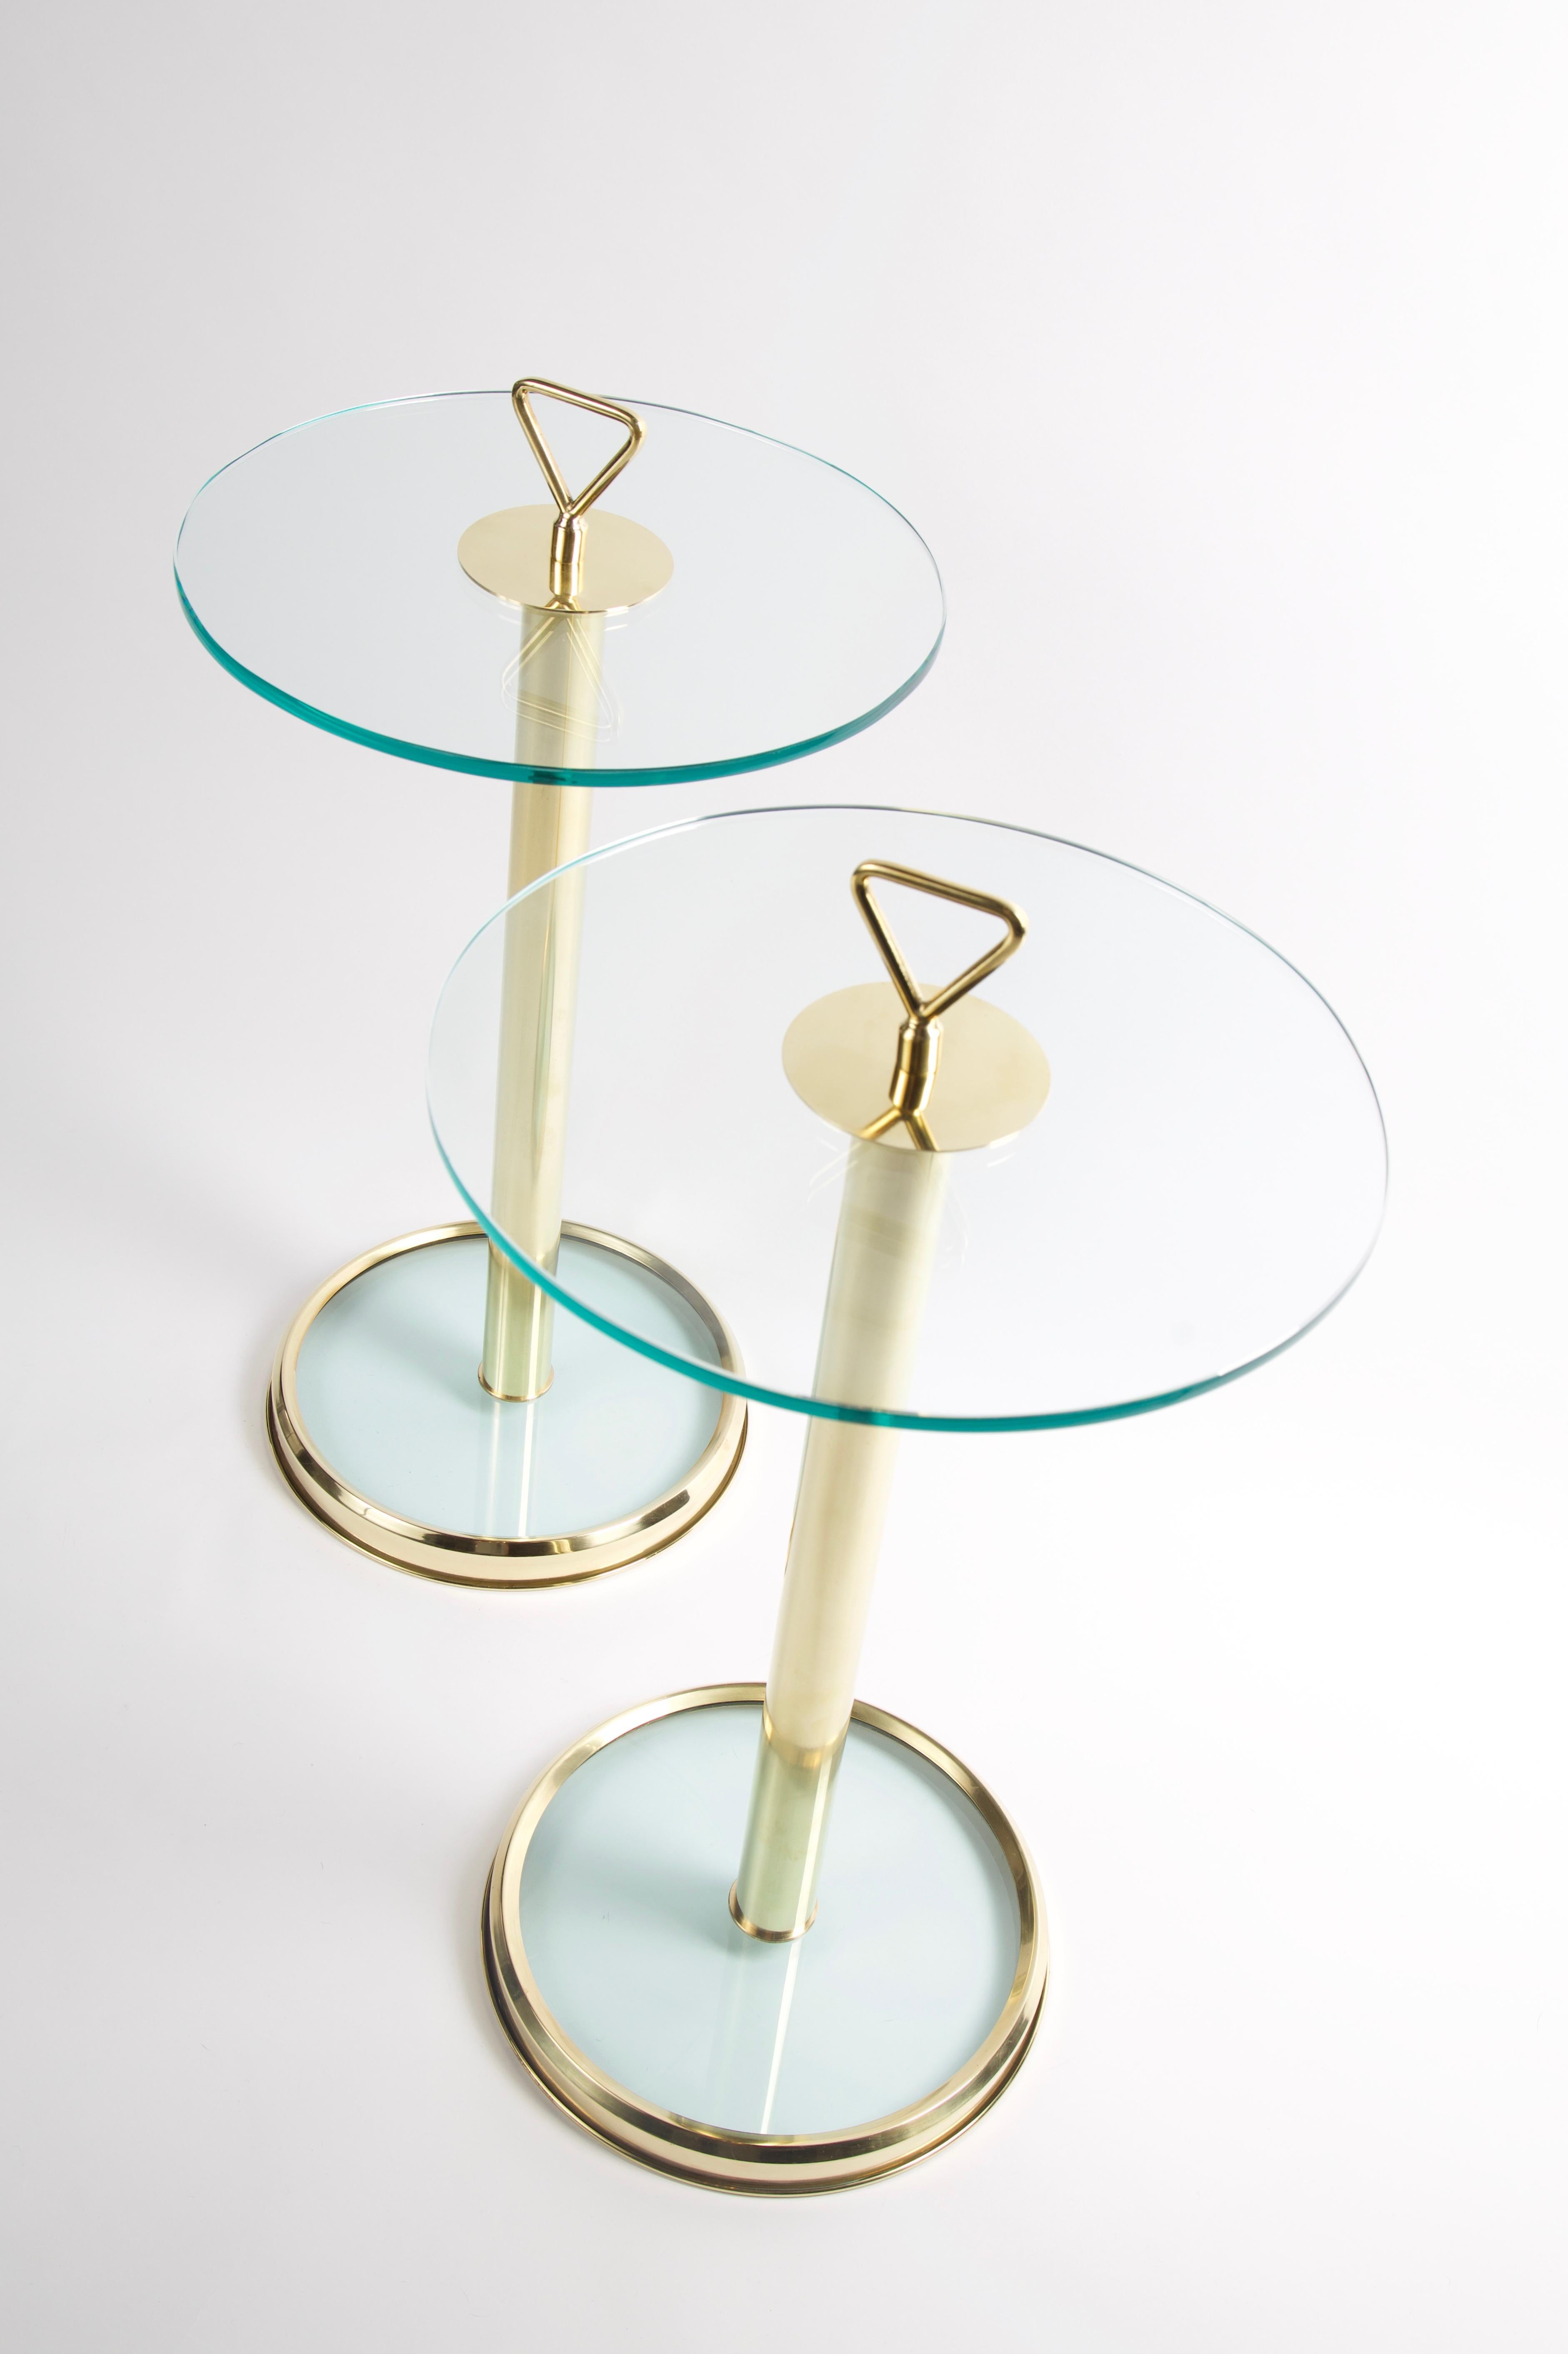 The pair of modern Italian tables features a glass top supported by a polished brass base. They are accented with a minimalistic triangular handle on the top. The glass base of the tables are incased in a beveled brass frame with a 12.5 inch